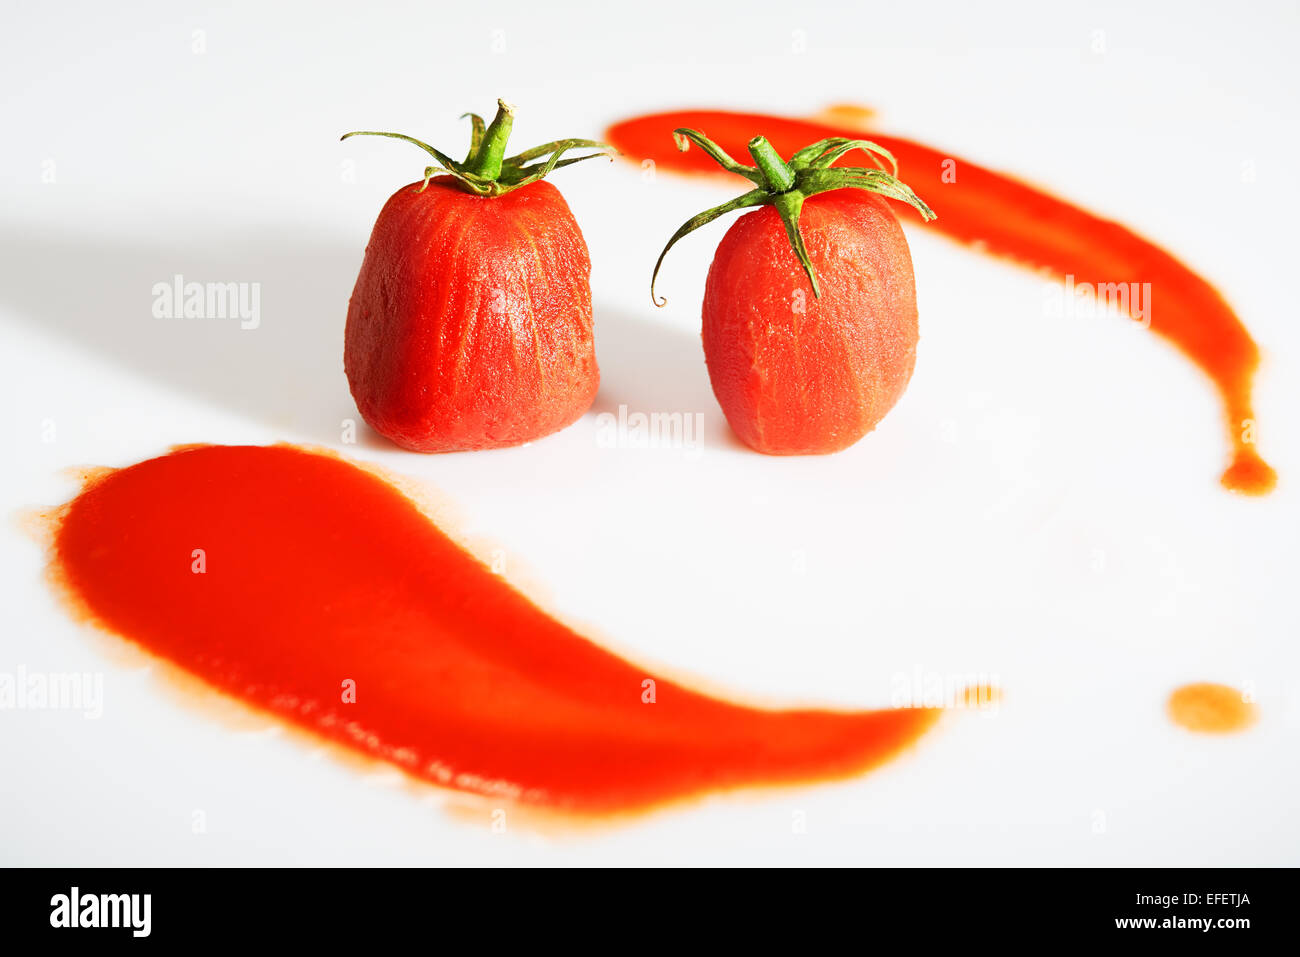 Peeled tomatoes with stems on top and tomato sauce around them Stock Photo